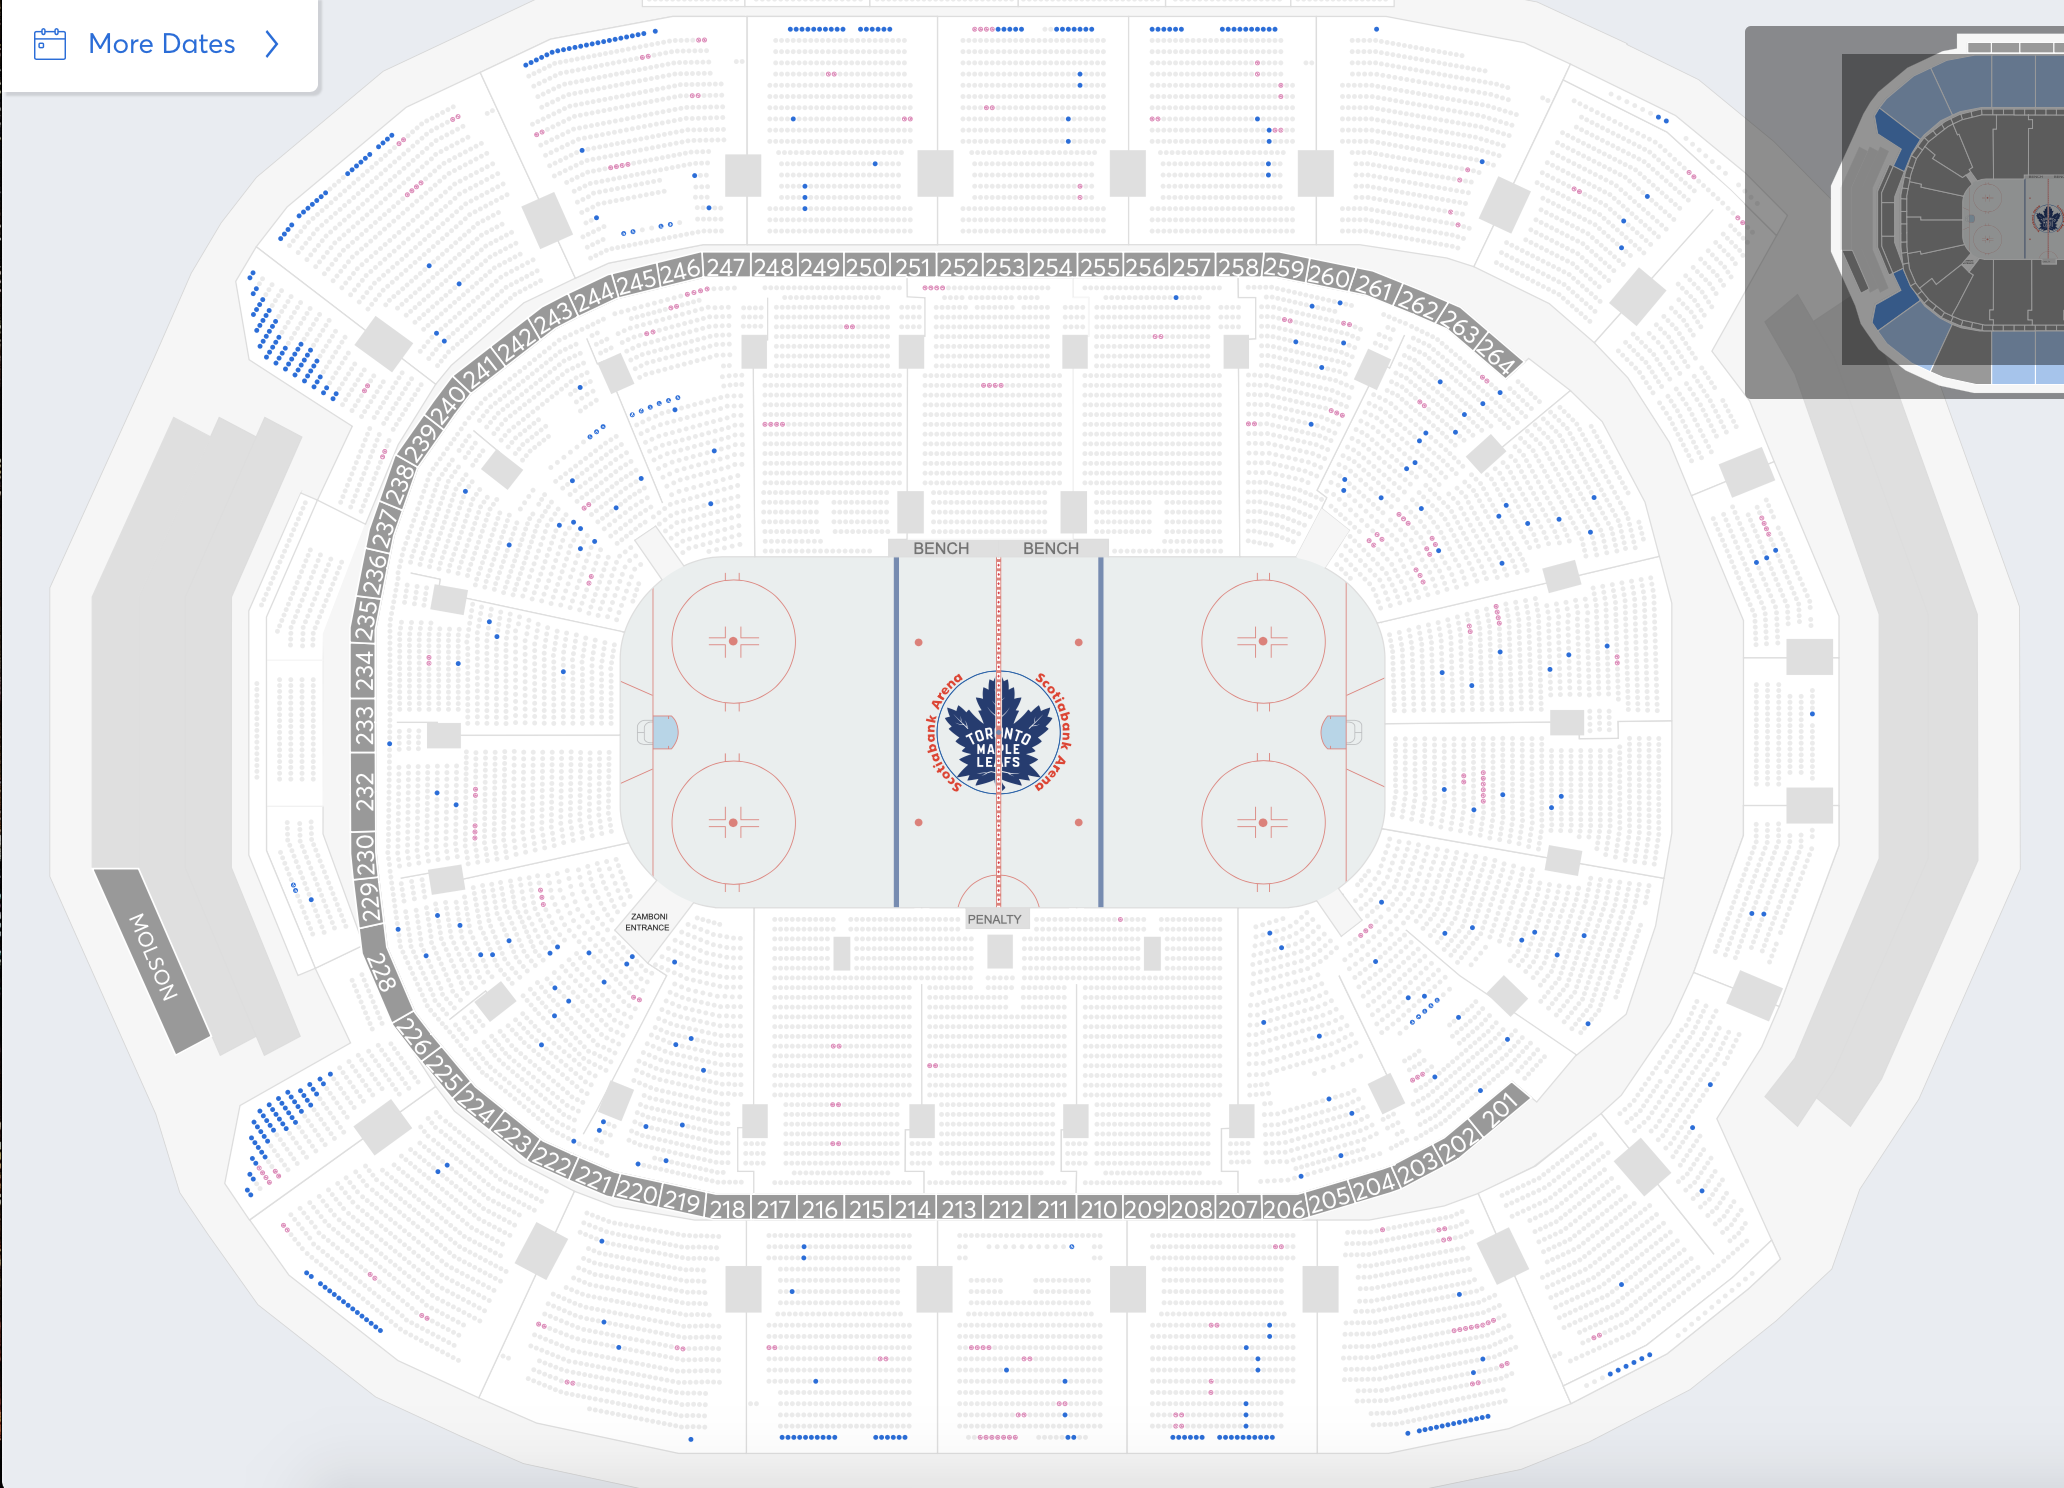 How To Find The Cheapest Toronto Maple Leafs Tickets + Face Value Options